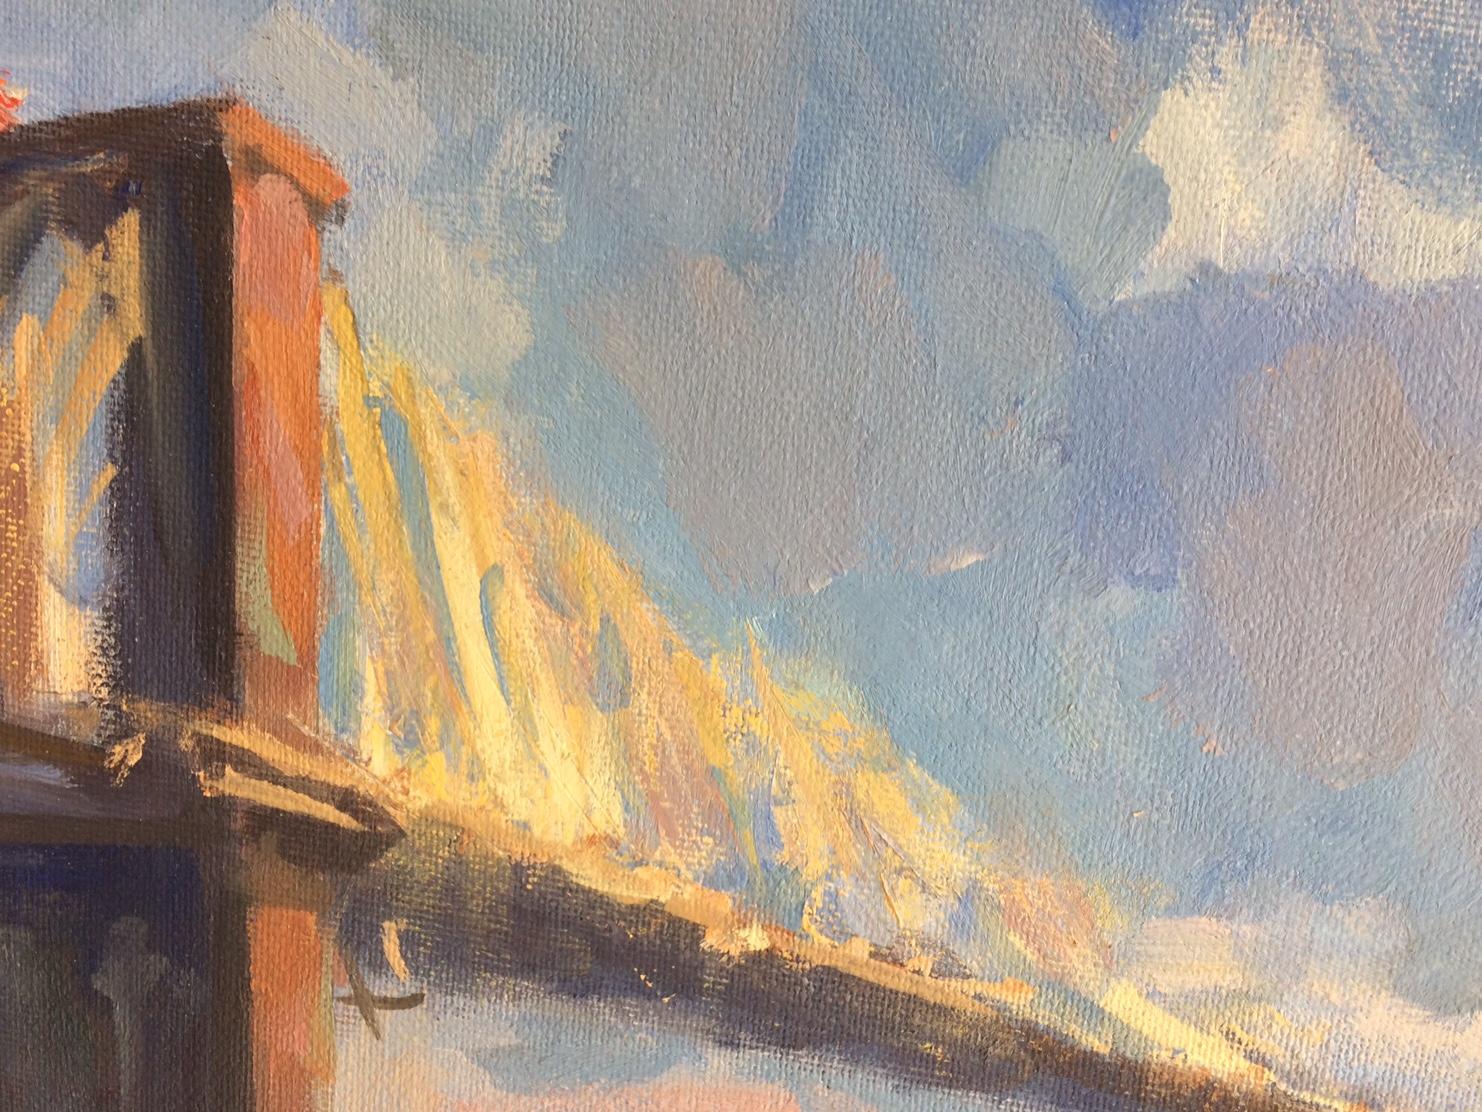 Another day, another New York City evening with the glow of the Brooklyn Bridge at the golden hour.  The Brooklyn Bridge is an iconic symbol of today's NYC while it remains equally important to residents of years past.  Artist Lee Haber captured the